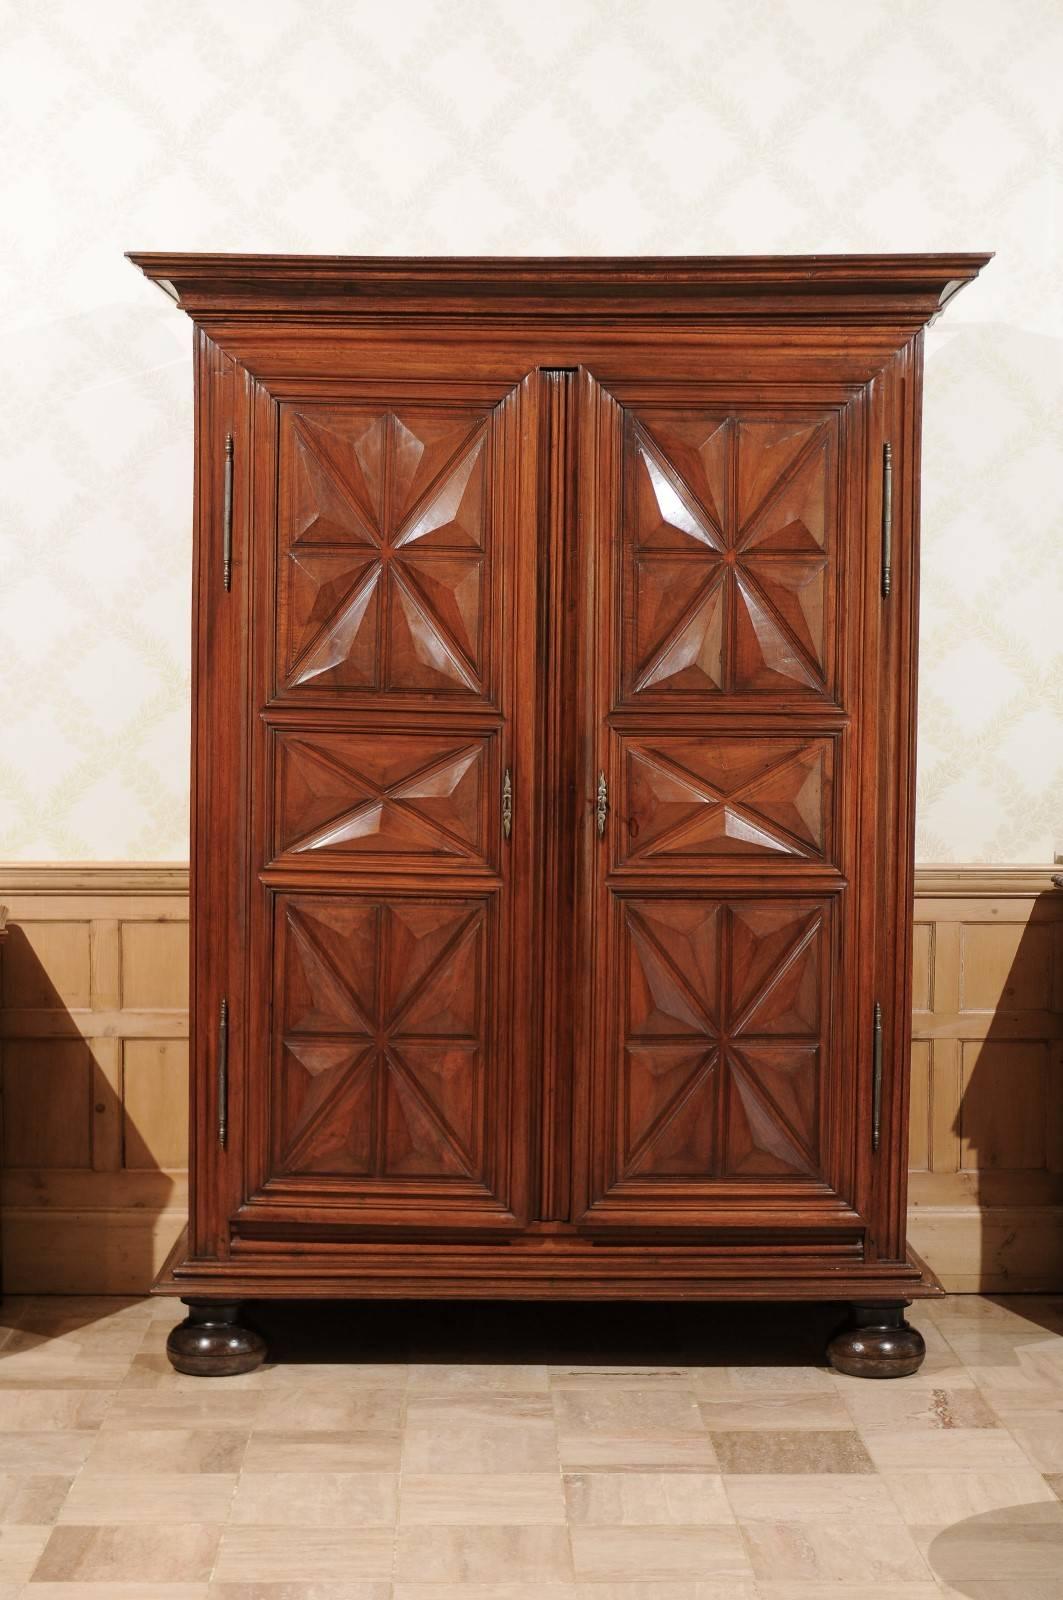 18th century period walnut Louis XIII Armoire, circa 1780
The point de diamond pattern of the Louis XIII period is quite impressive. The carving is deep into the wood and a wonderful geometric design. The 
 large bun feet also accentuate the size